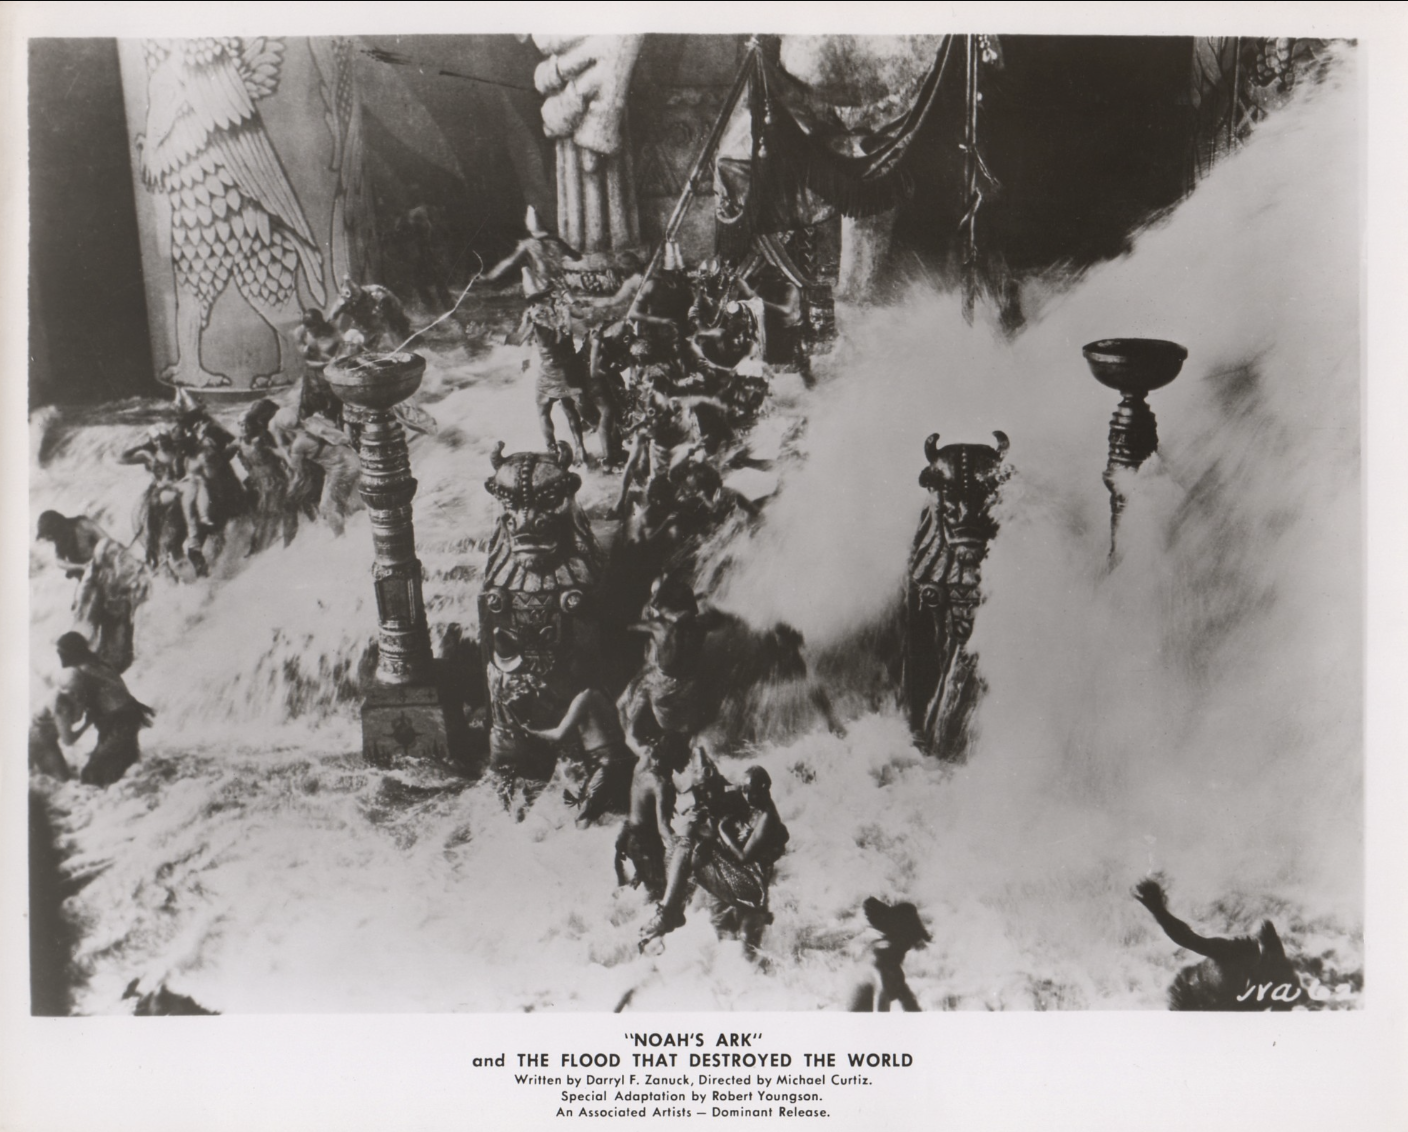 I don't know if it qualifies as a "stunt" along the lines of what you're thinking of, but according to legend Curtiz actually flooded the set to film a flood scene in his production of Noah's Ark, which led to the death of multiple extras and injuries for much of the leading cast.